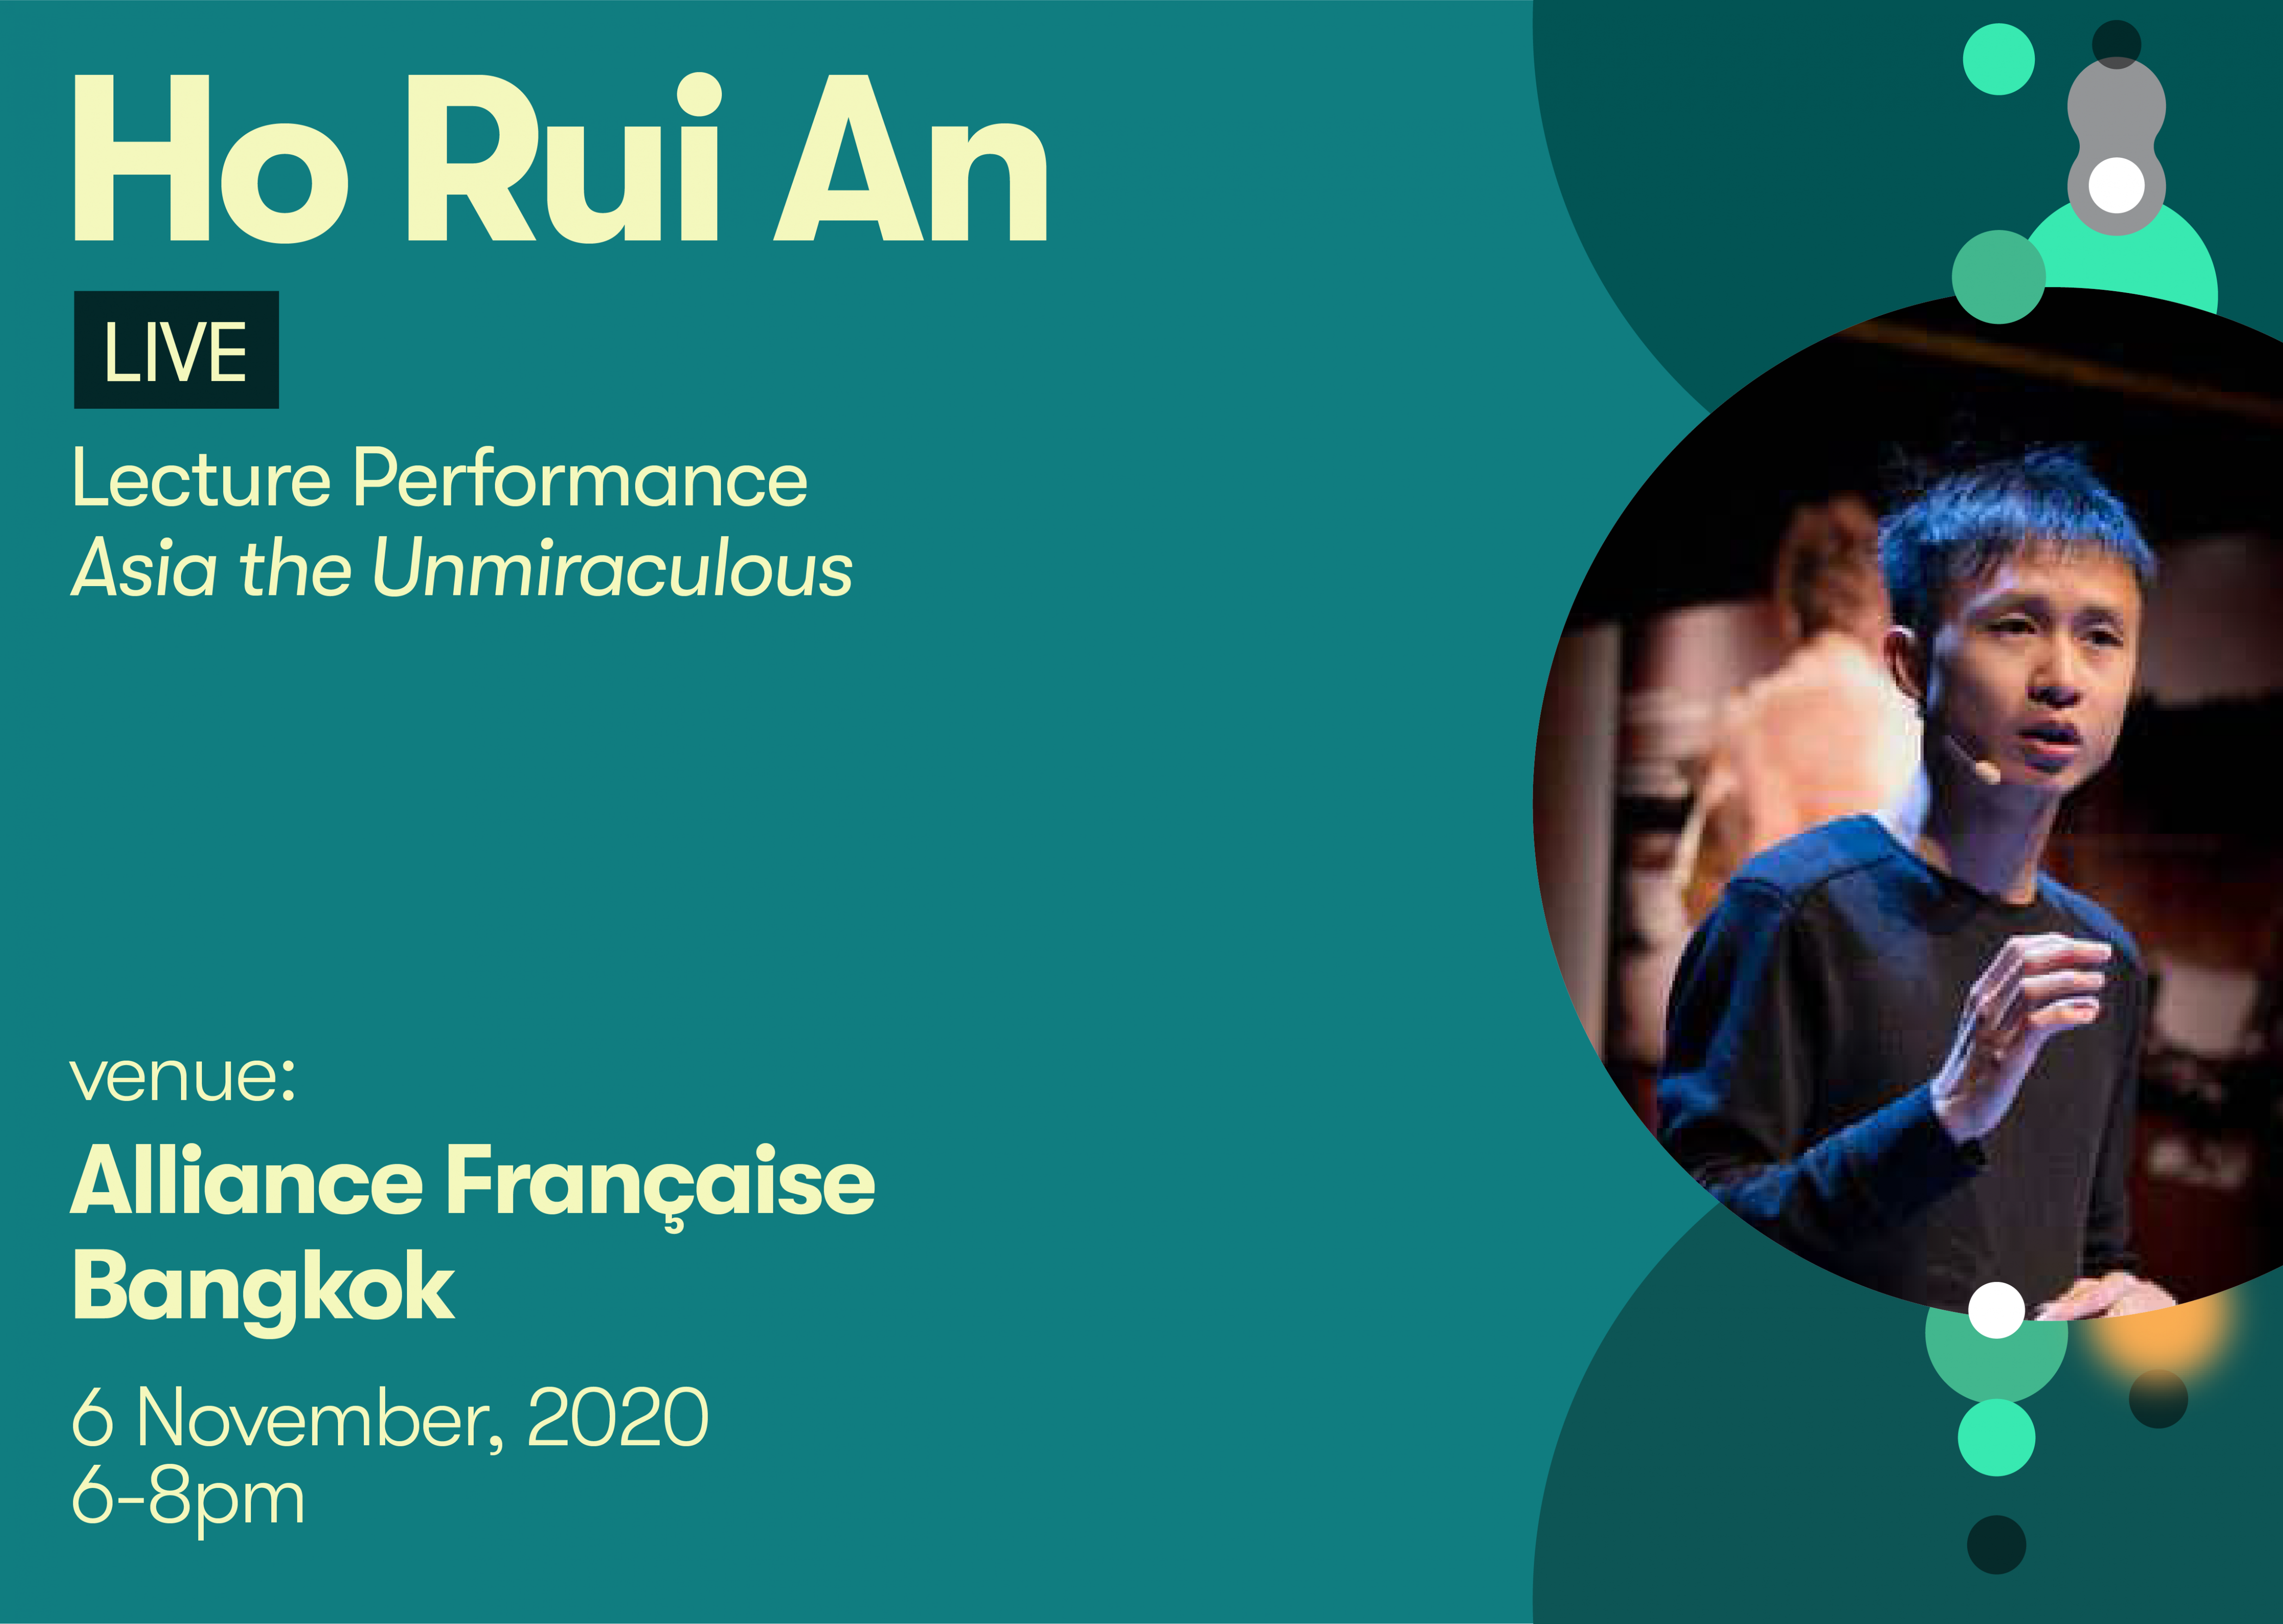 'Asia the Unmiraculous' | Lecture Performance by Ho Rui An